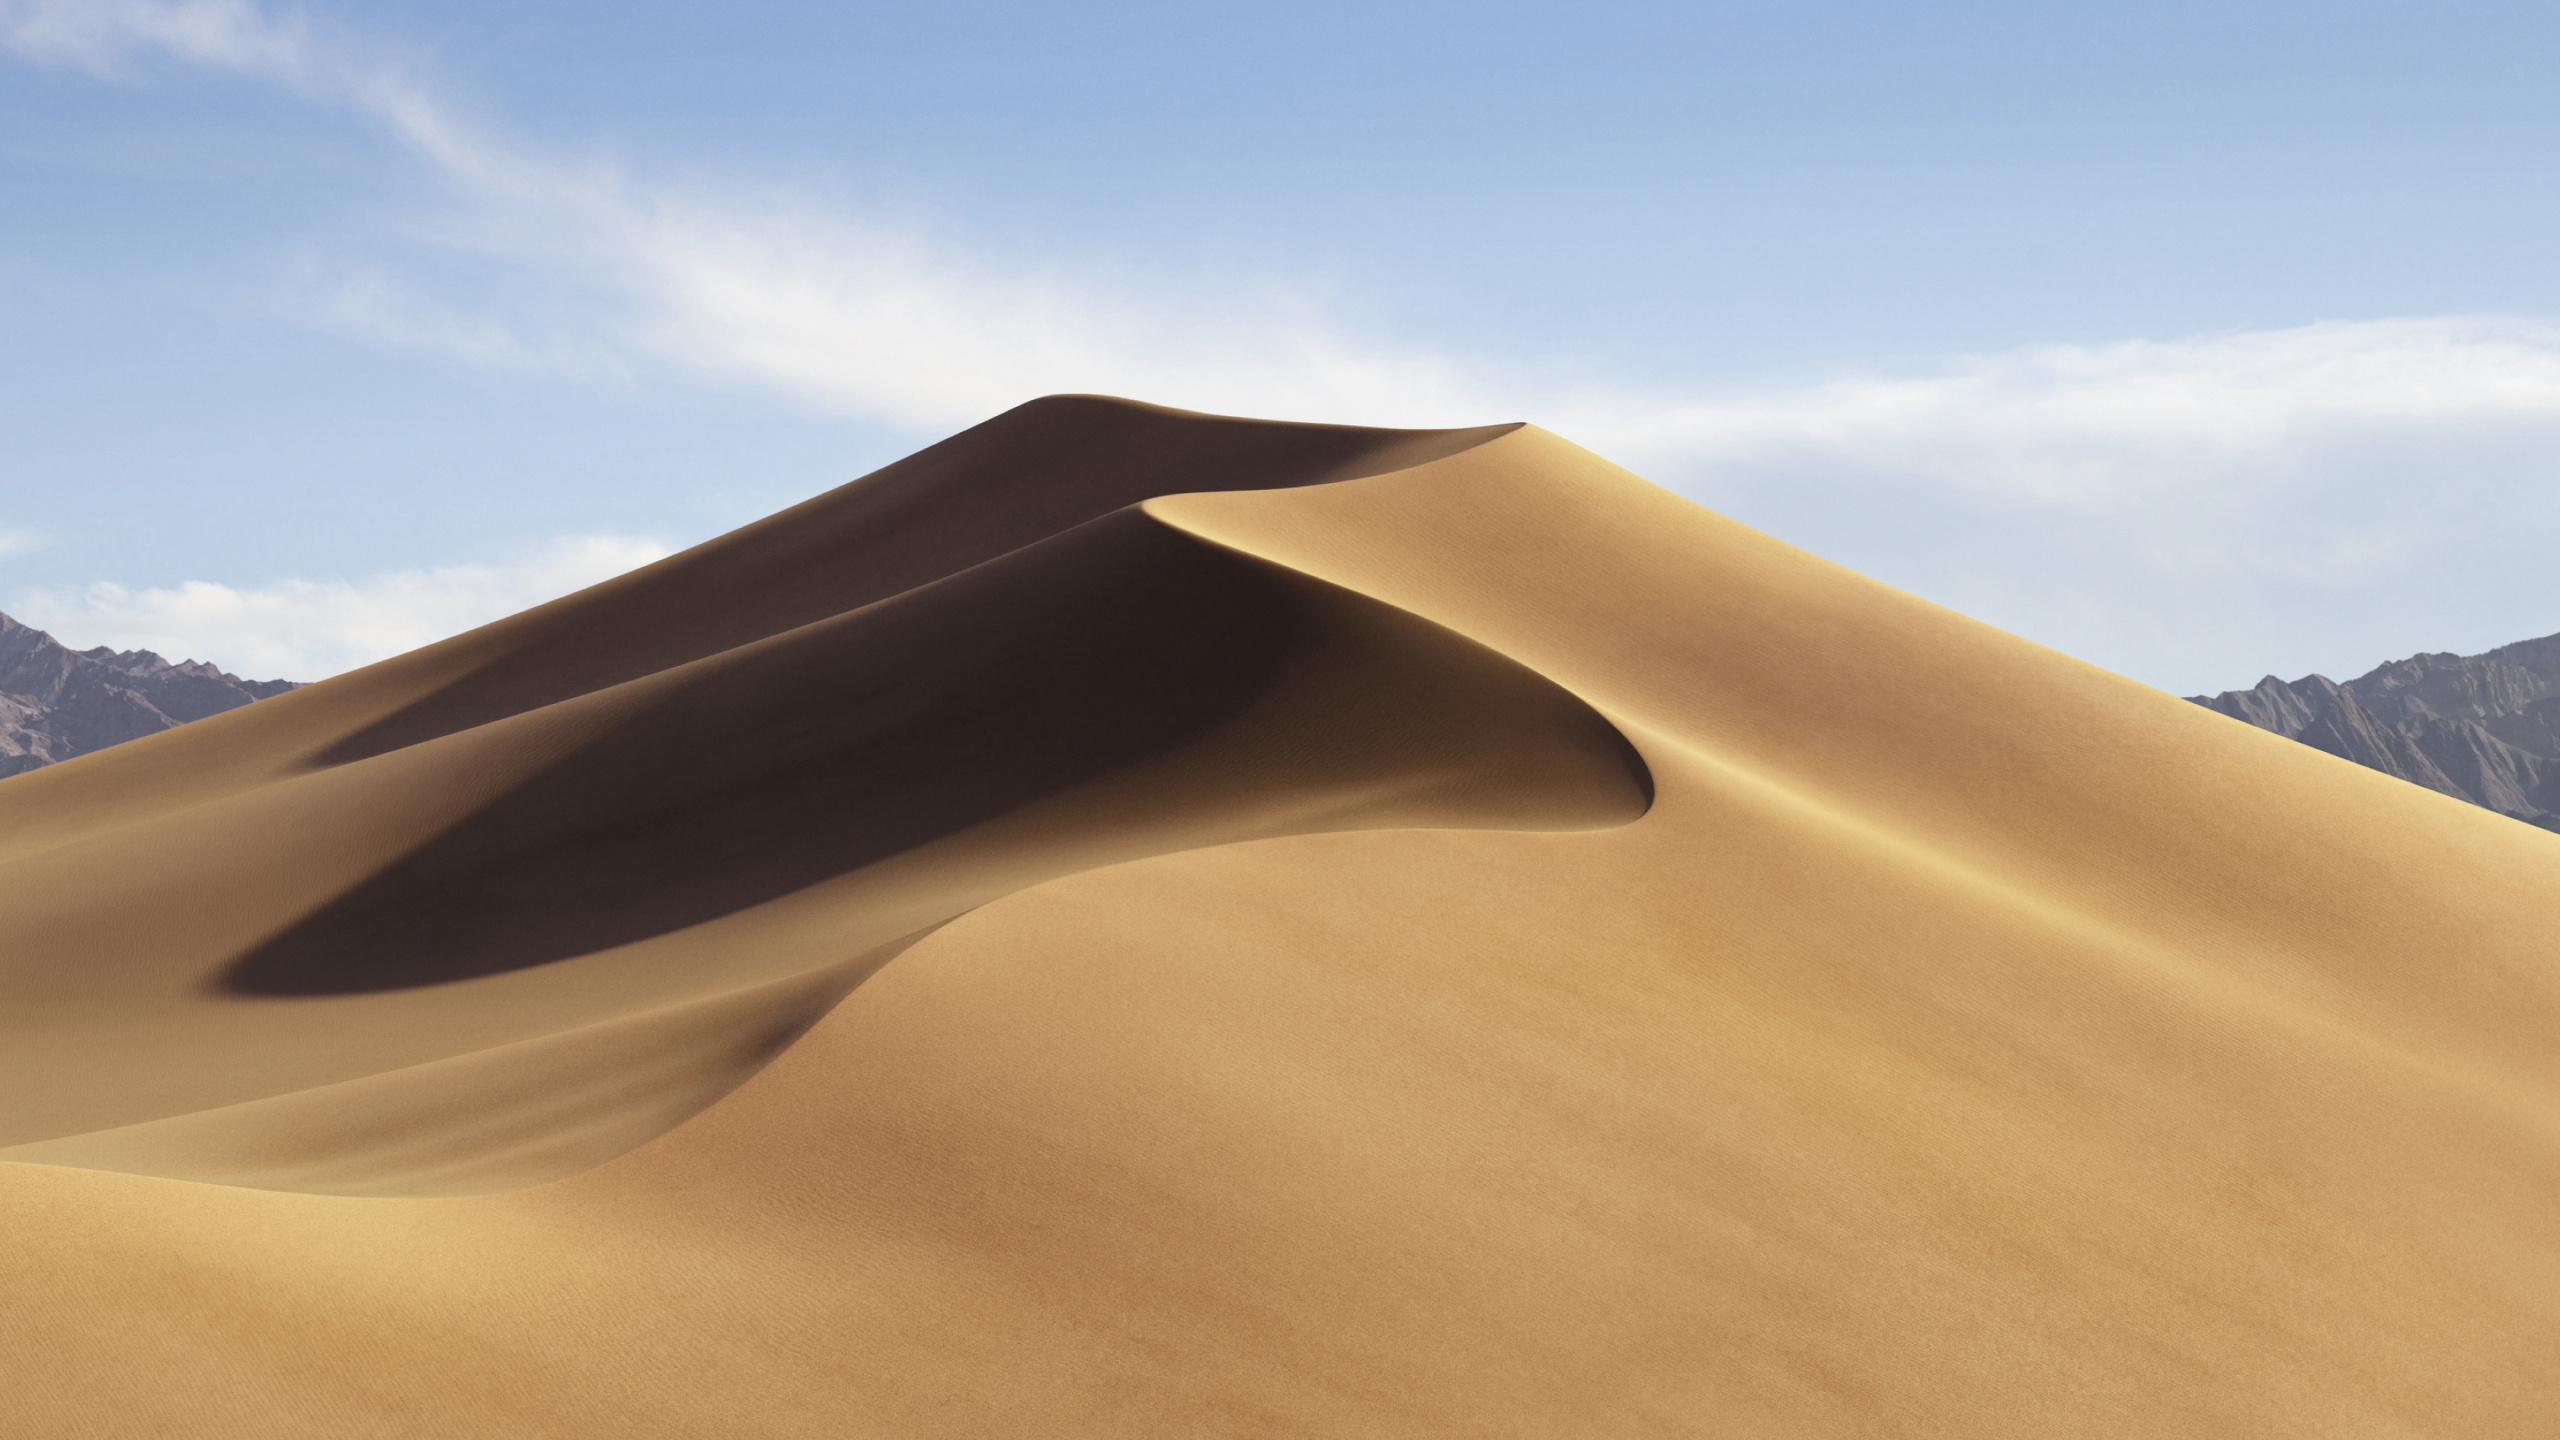 Download 2560x1440 wallpapers mojave desert, dune, sand, hot day